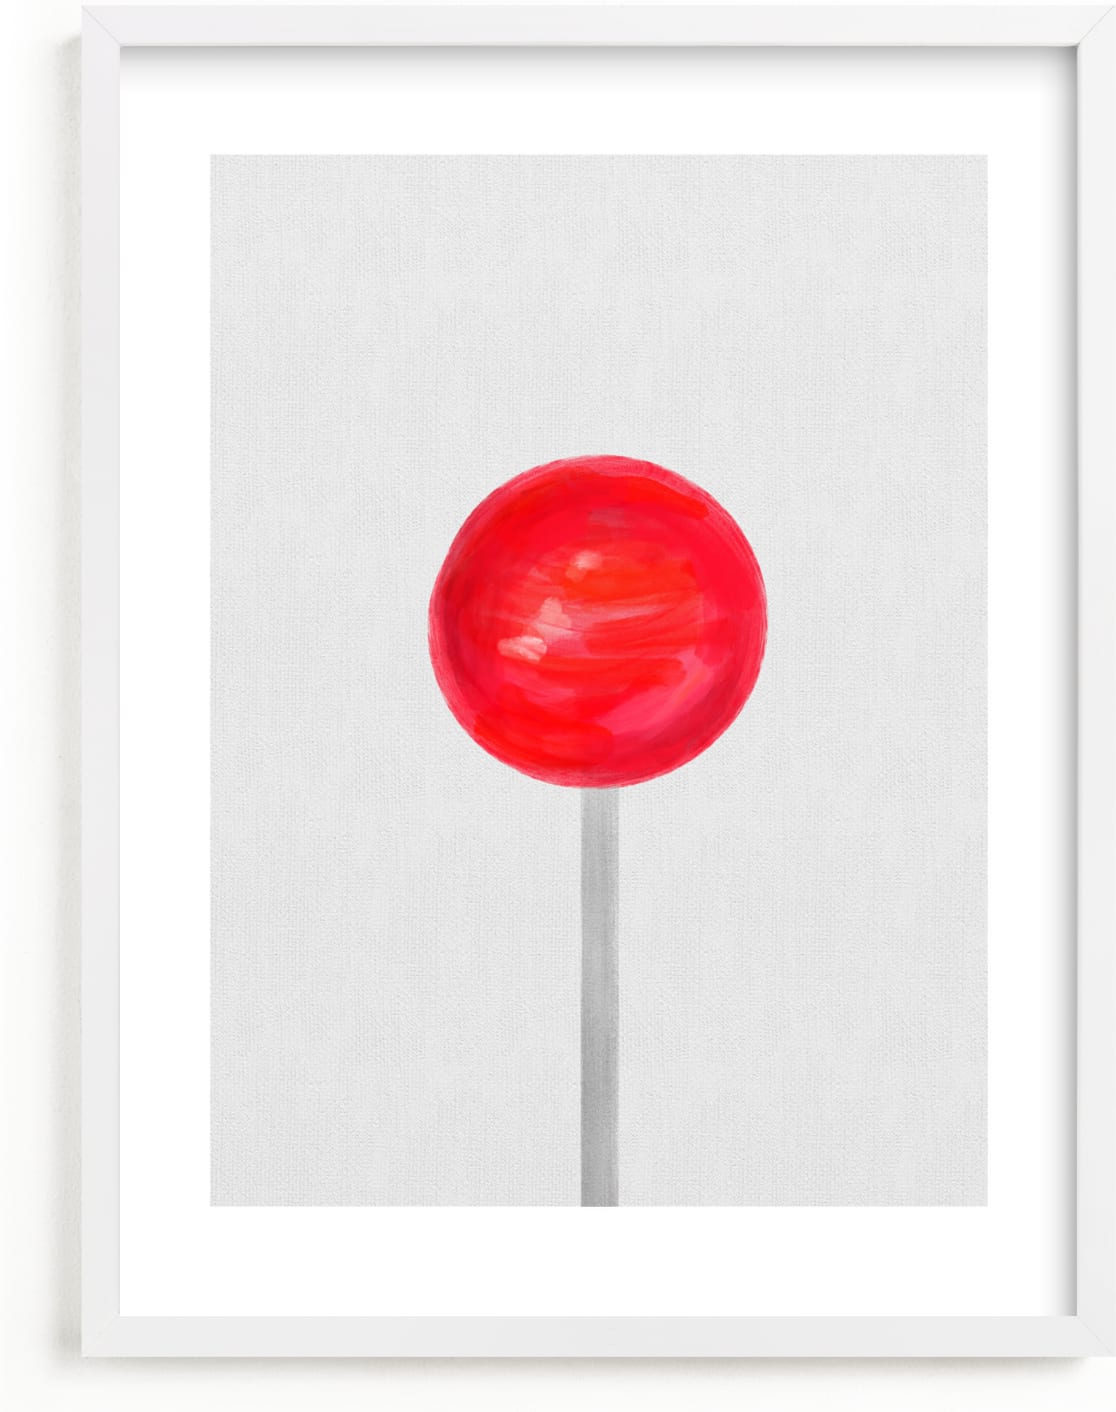 This is a red kids wall art by Maja Cunningham called Lolli Pop.